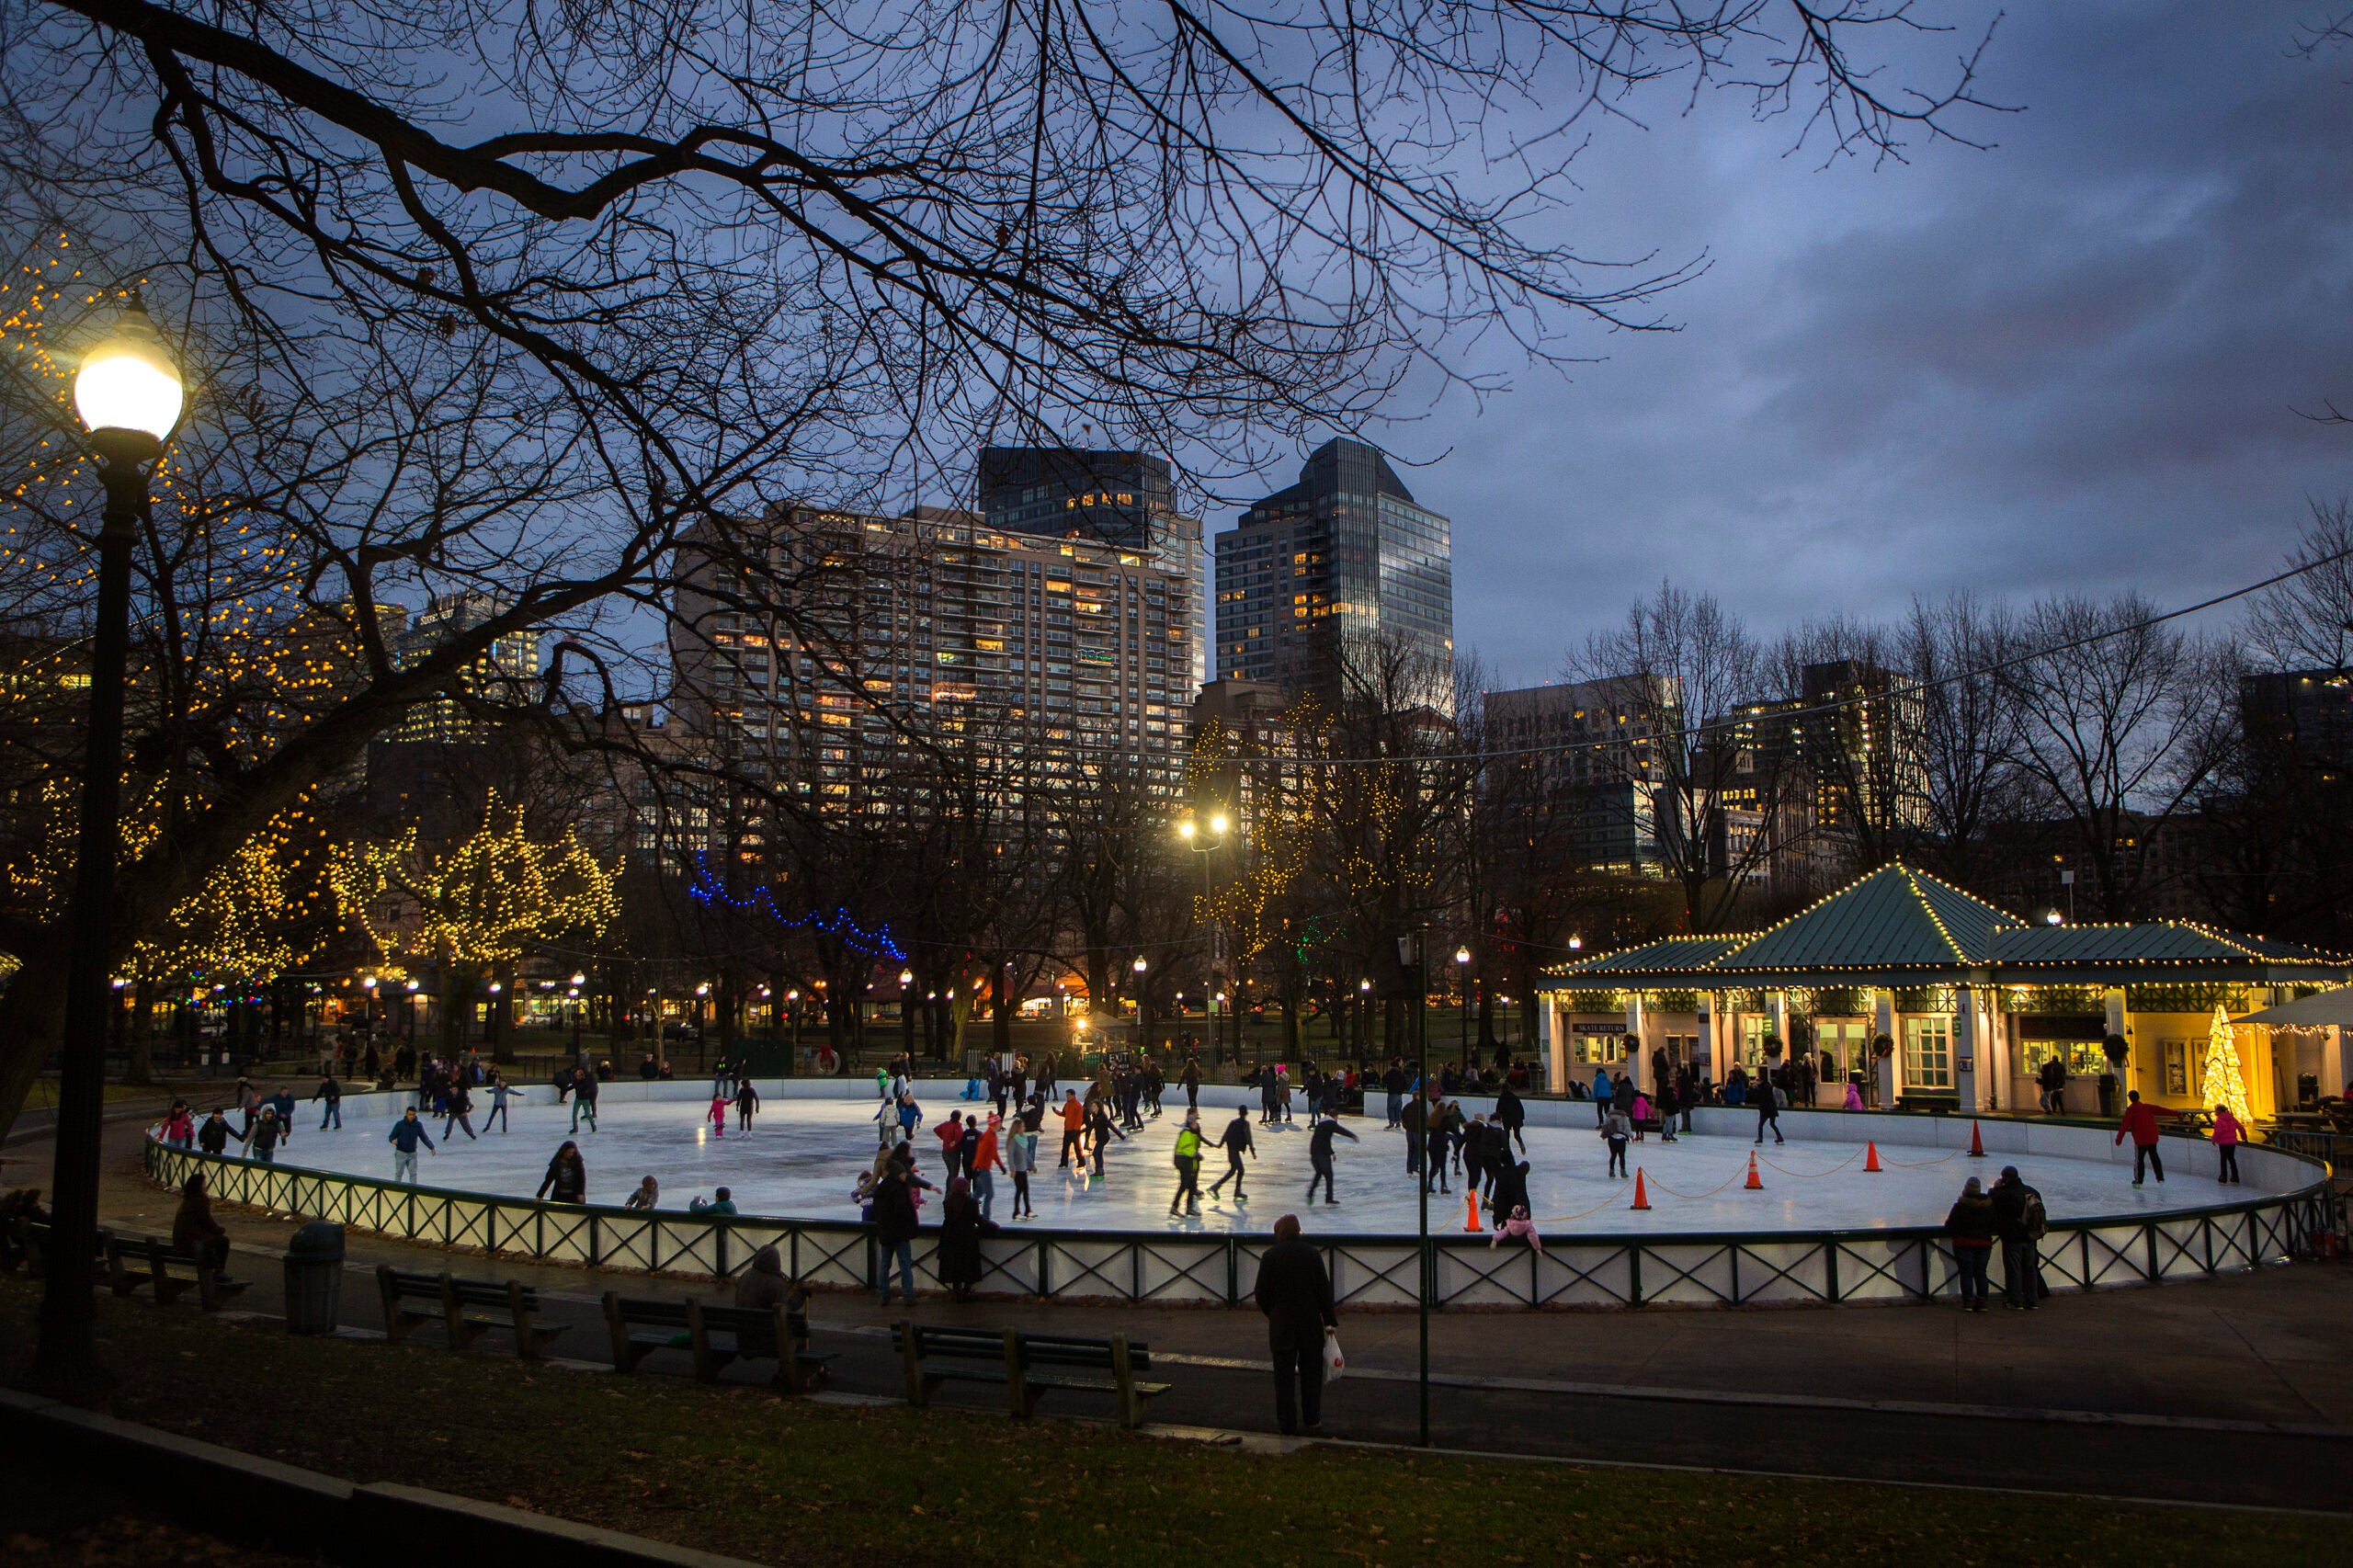 USA Today readers say the Boston Common Frog Pond is the best skating